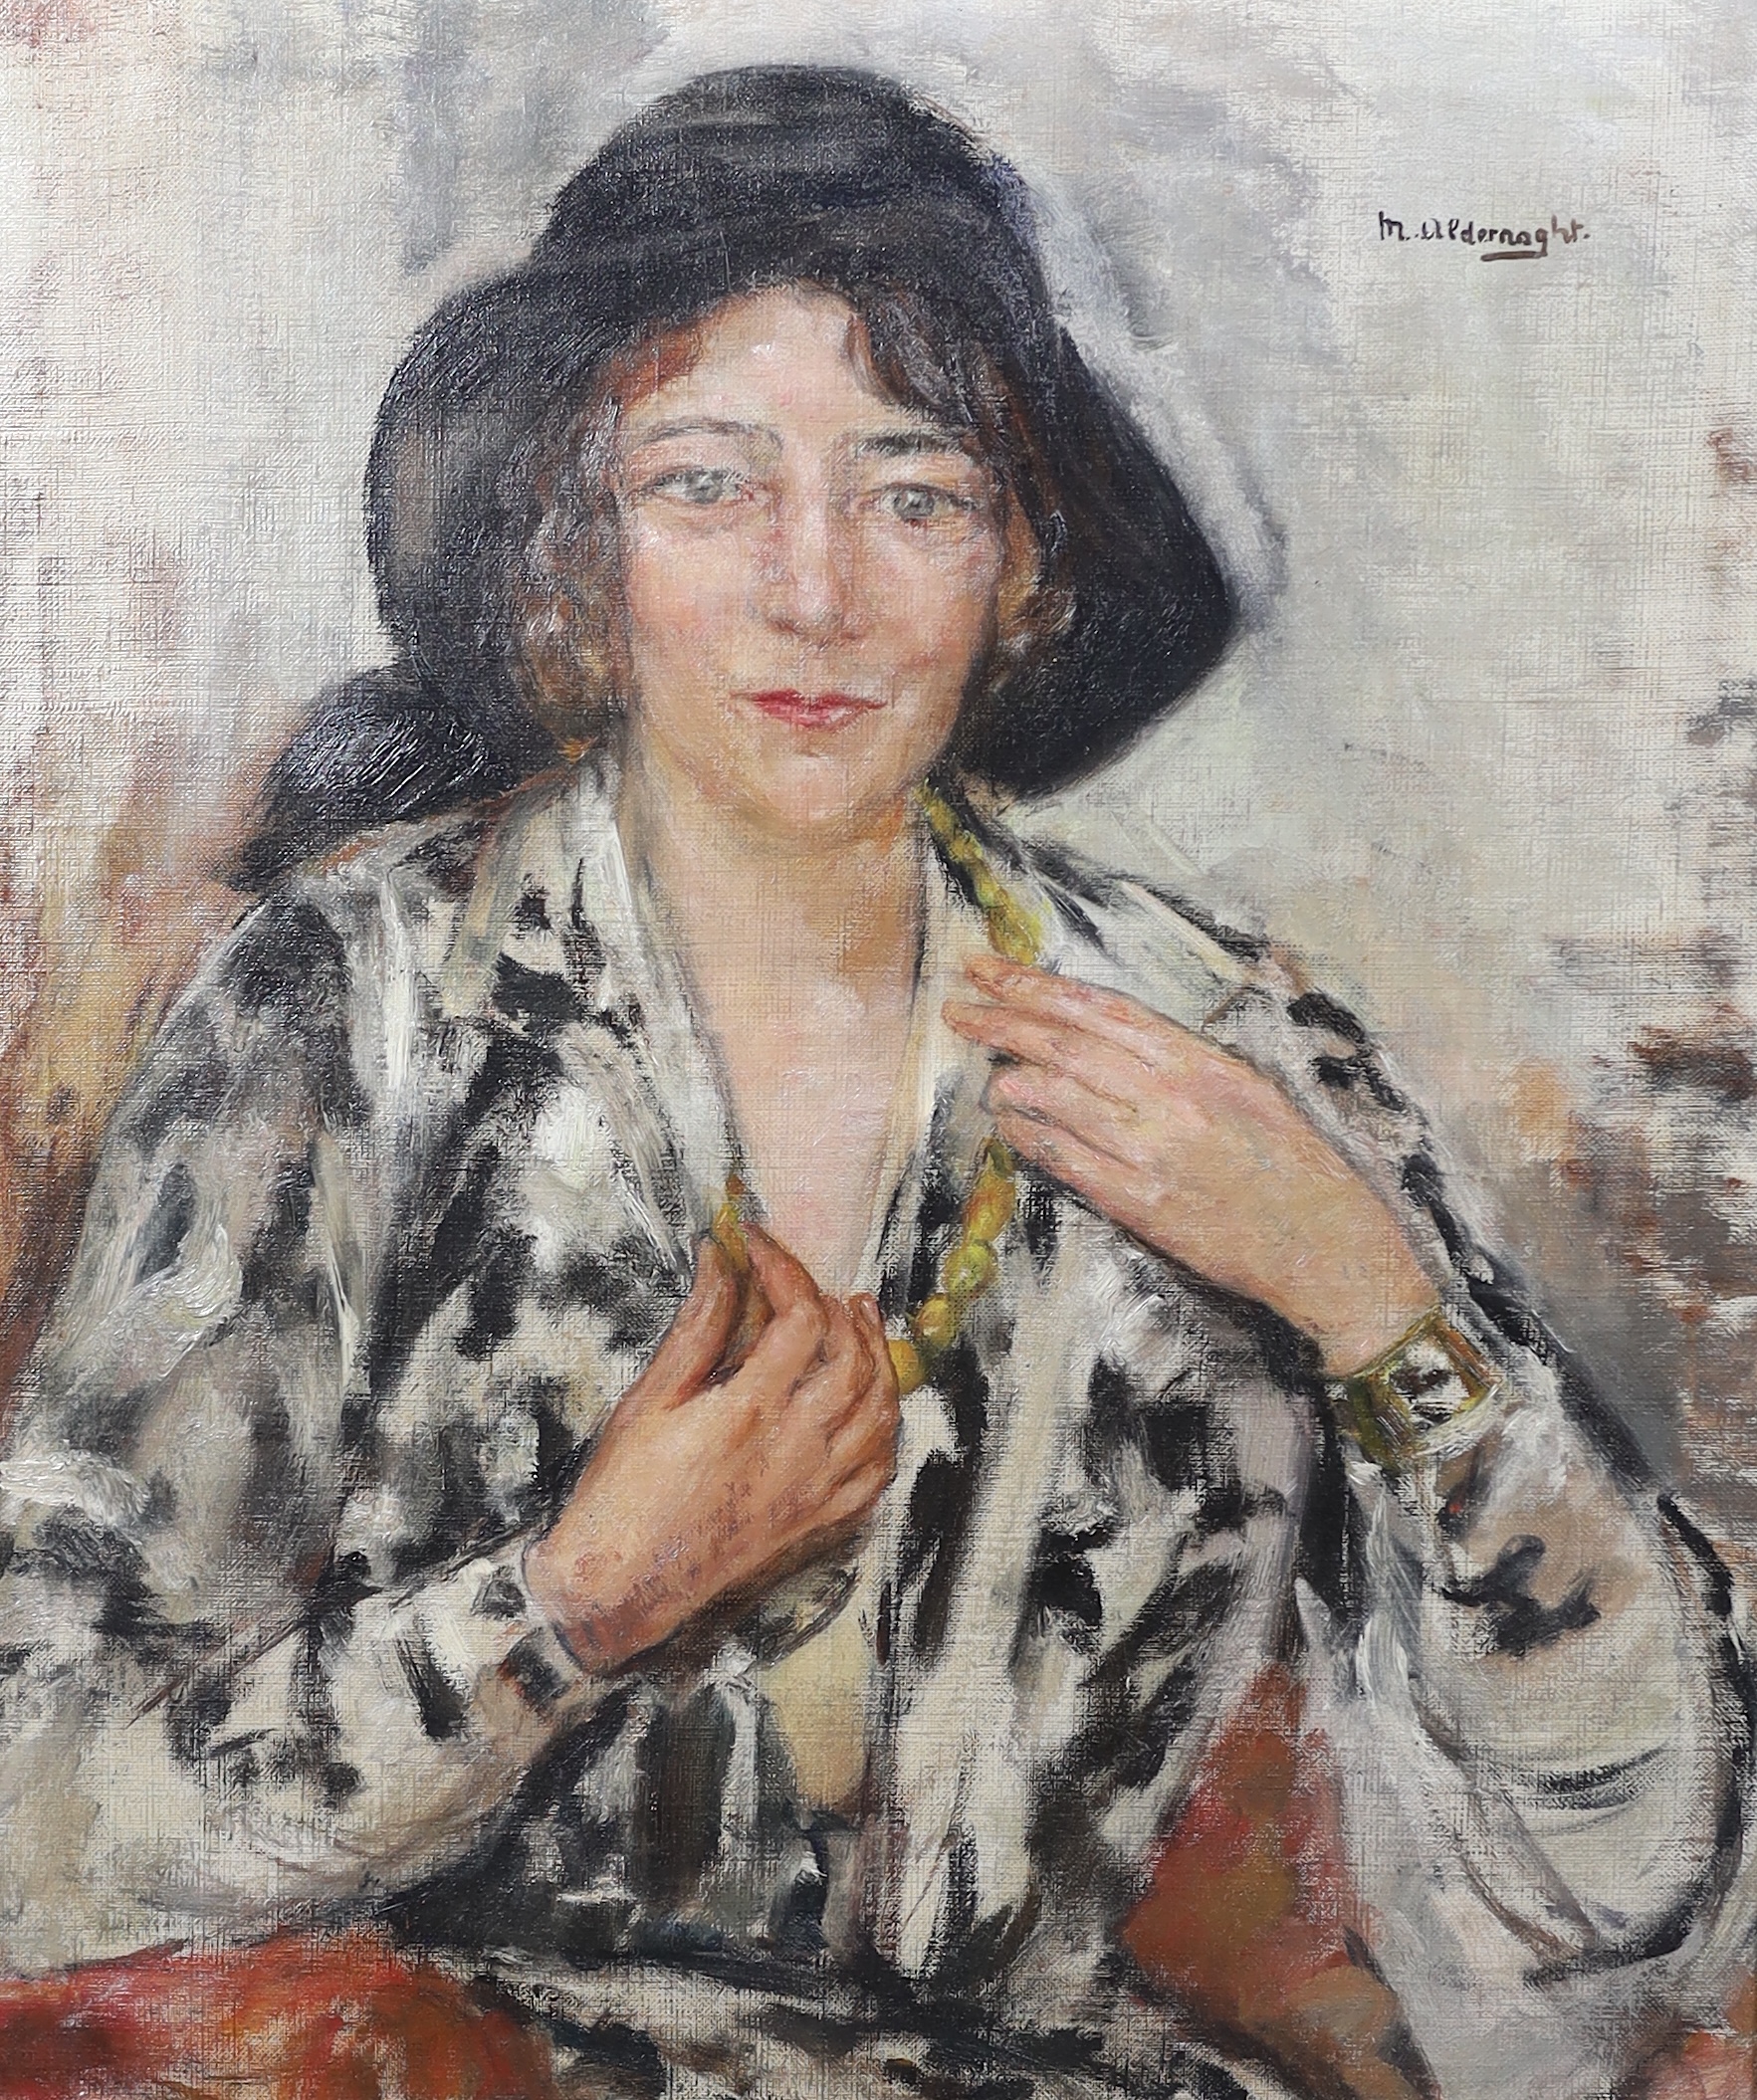 Maria Aldernaght (Belgian, 1902-1945), Portrait of a lady wearing an amber bead necklace, oil on canvas, 69 x 59cm